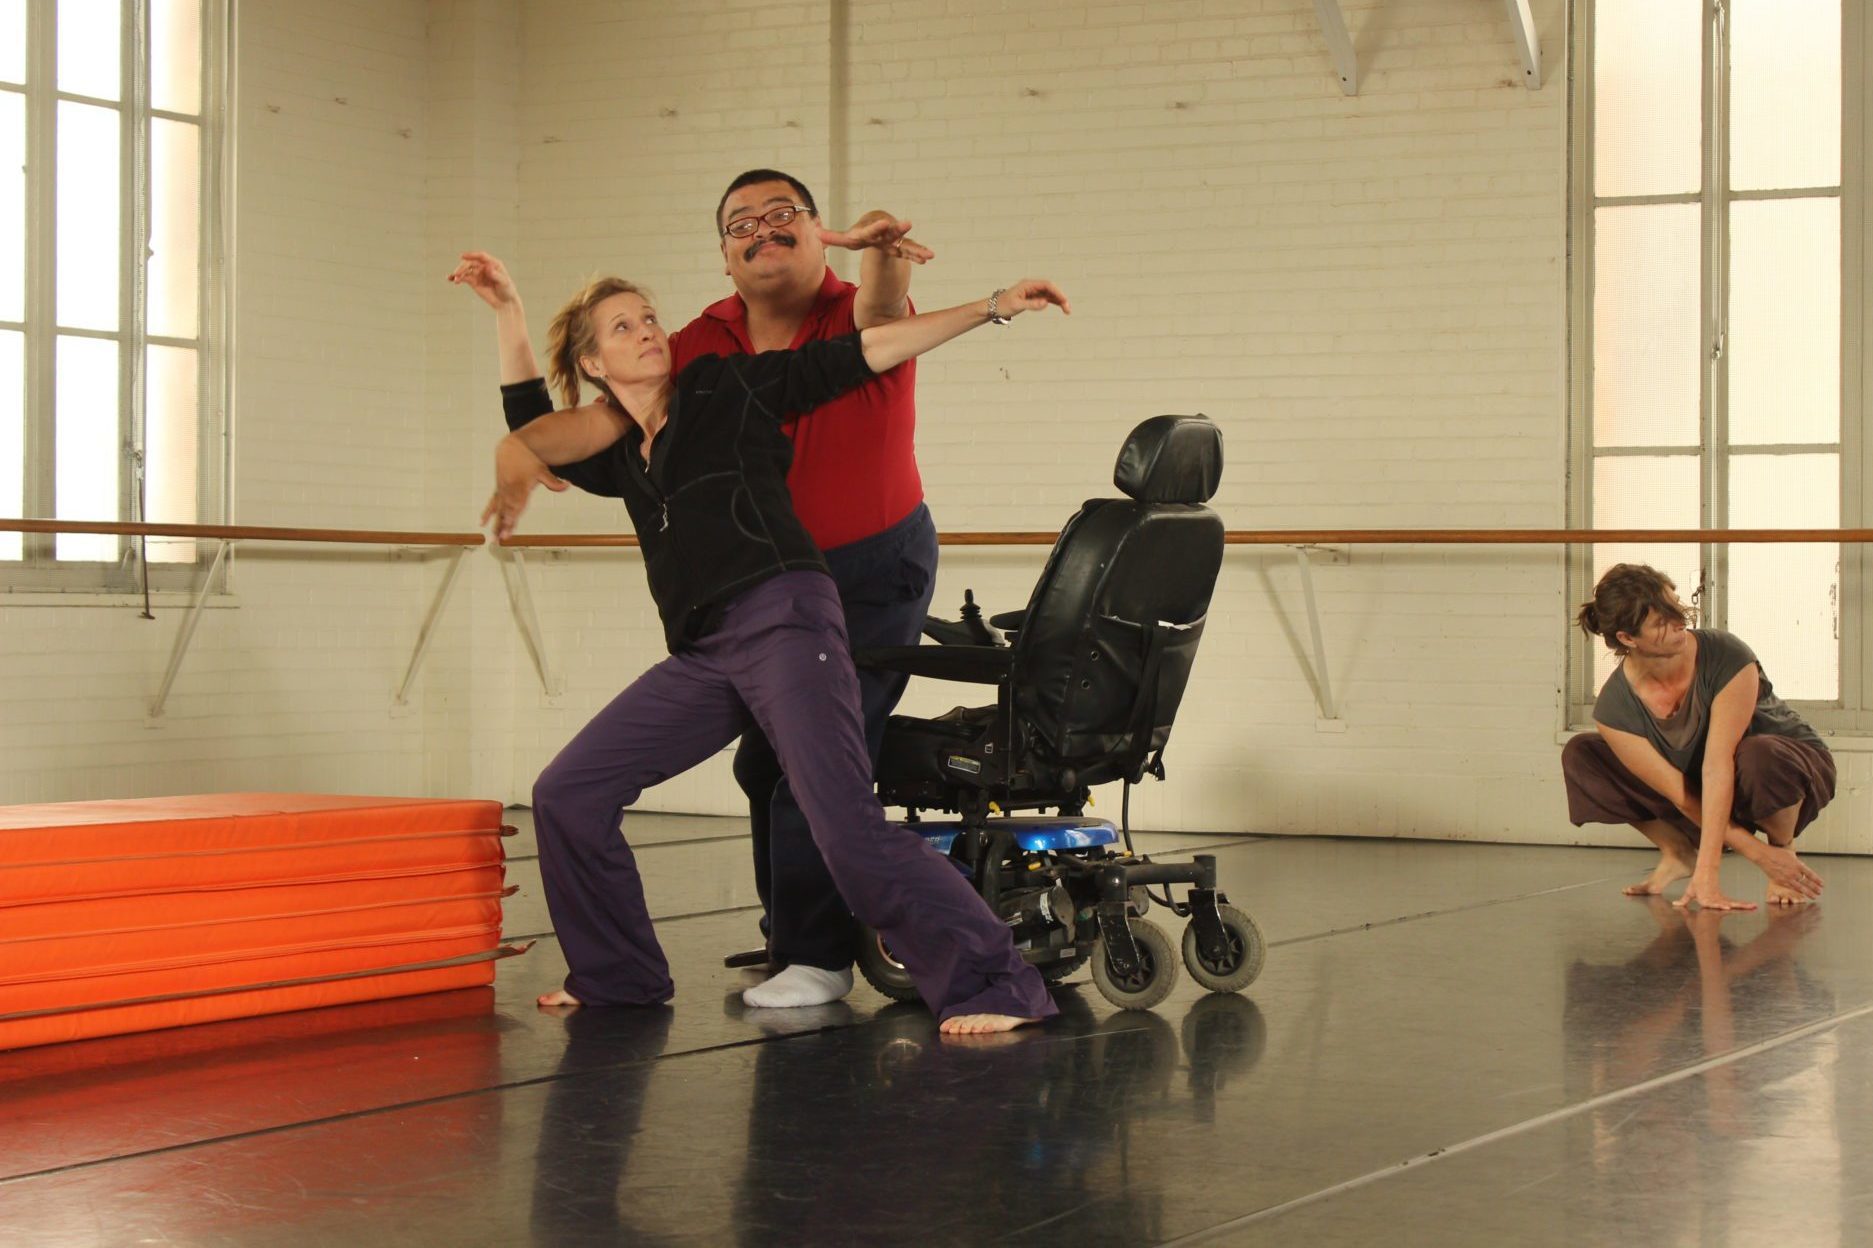 a wheelchair dancer and stand-up dancer practicing in a studio. The wheelchair dancer is standing embracing the stand-up dancer. Both are posed with one arm reaching out.